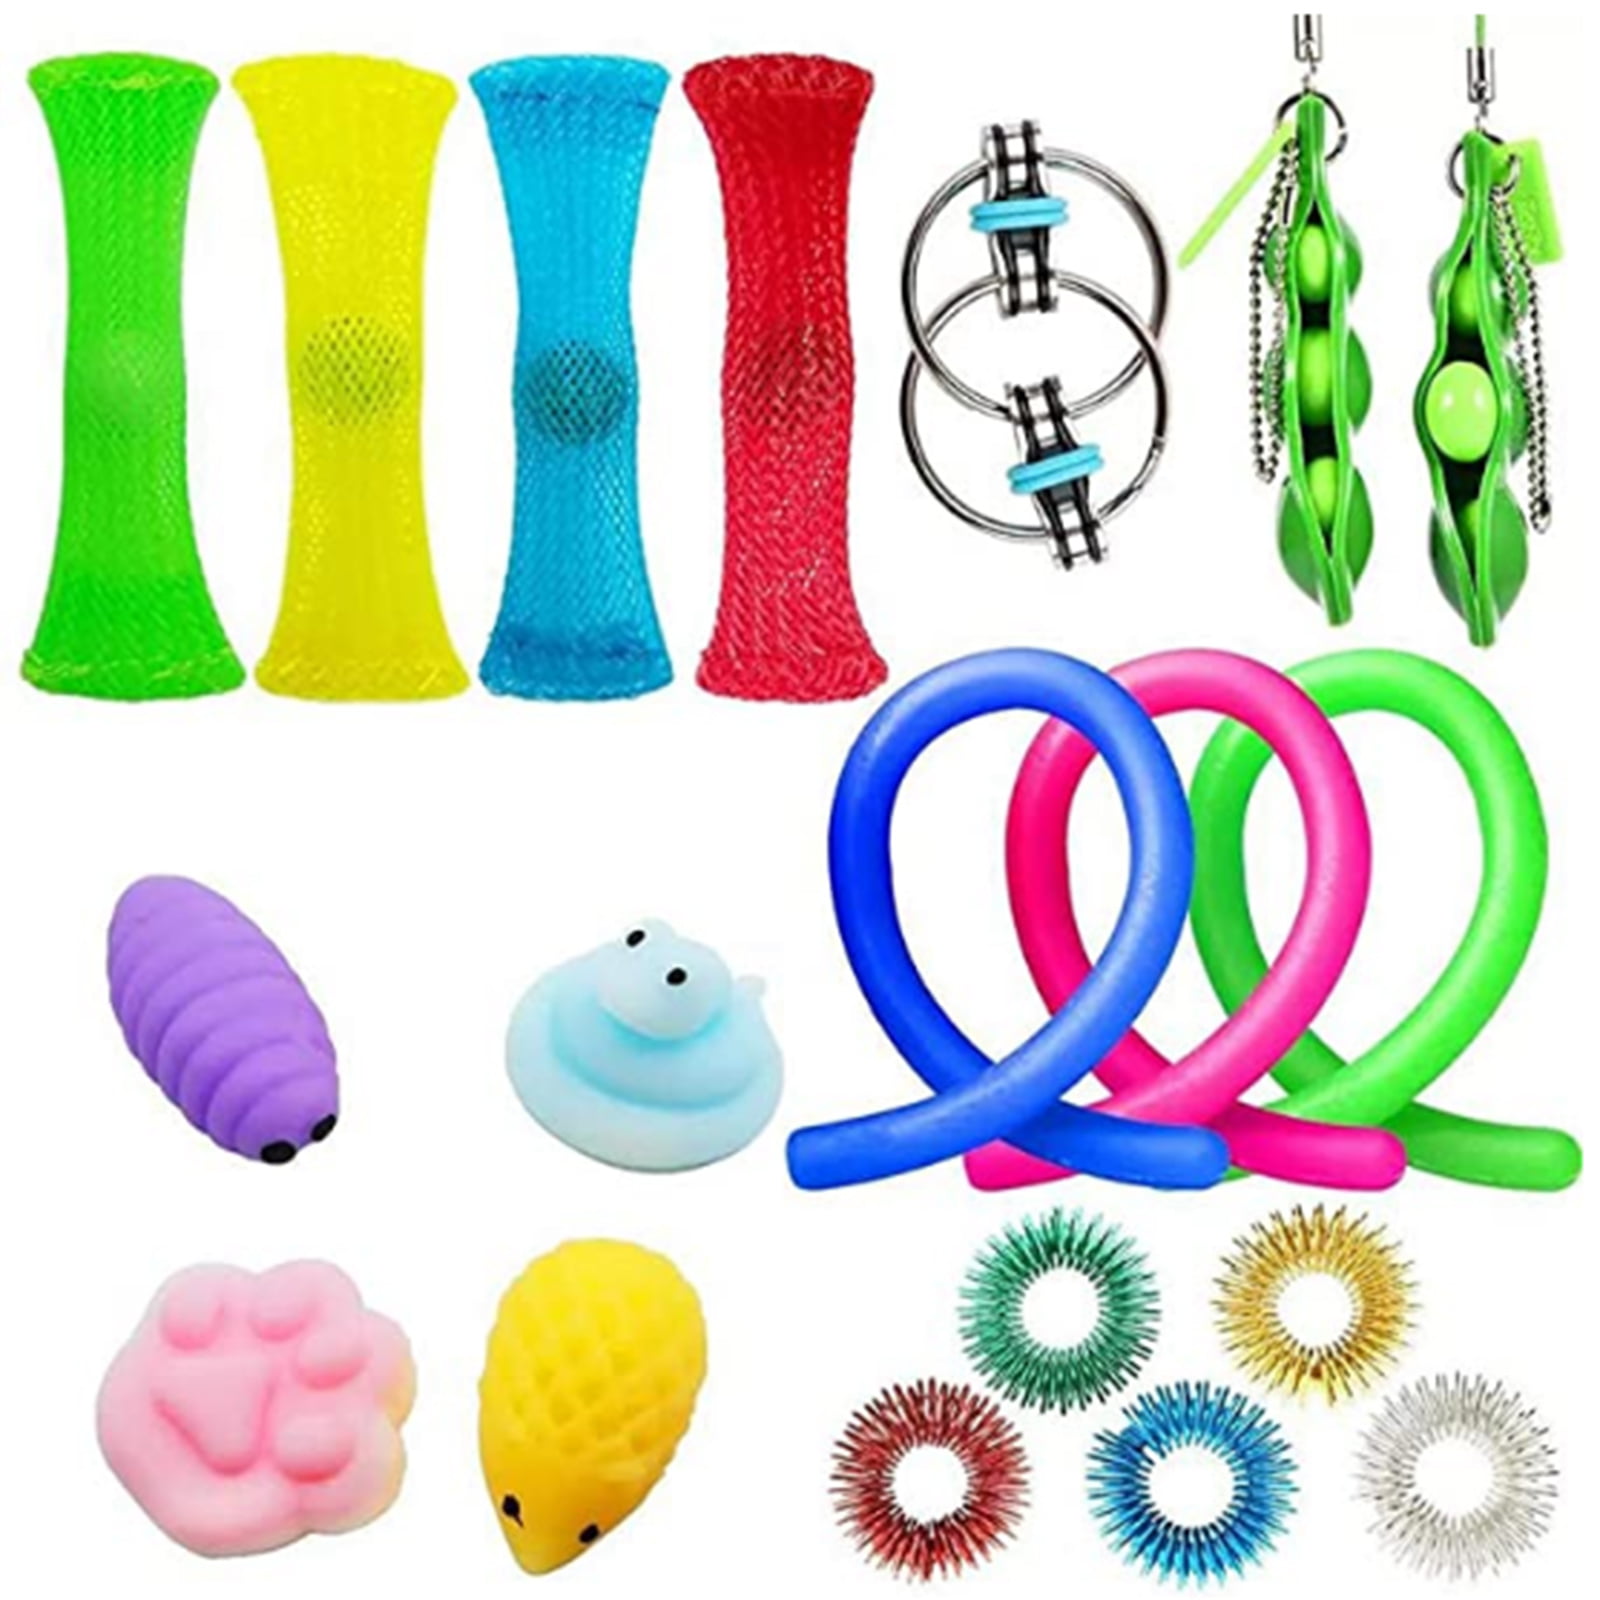 5Pcs Stretchy String Toys Autism ADHD Sensory Anti Stress Relief Anxiety Toys 